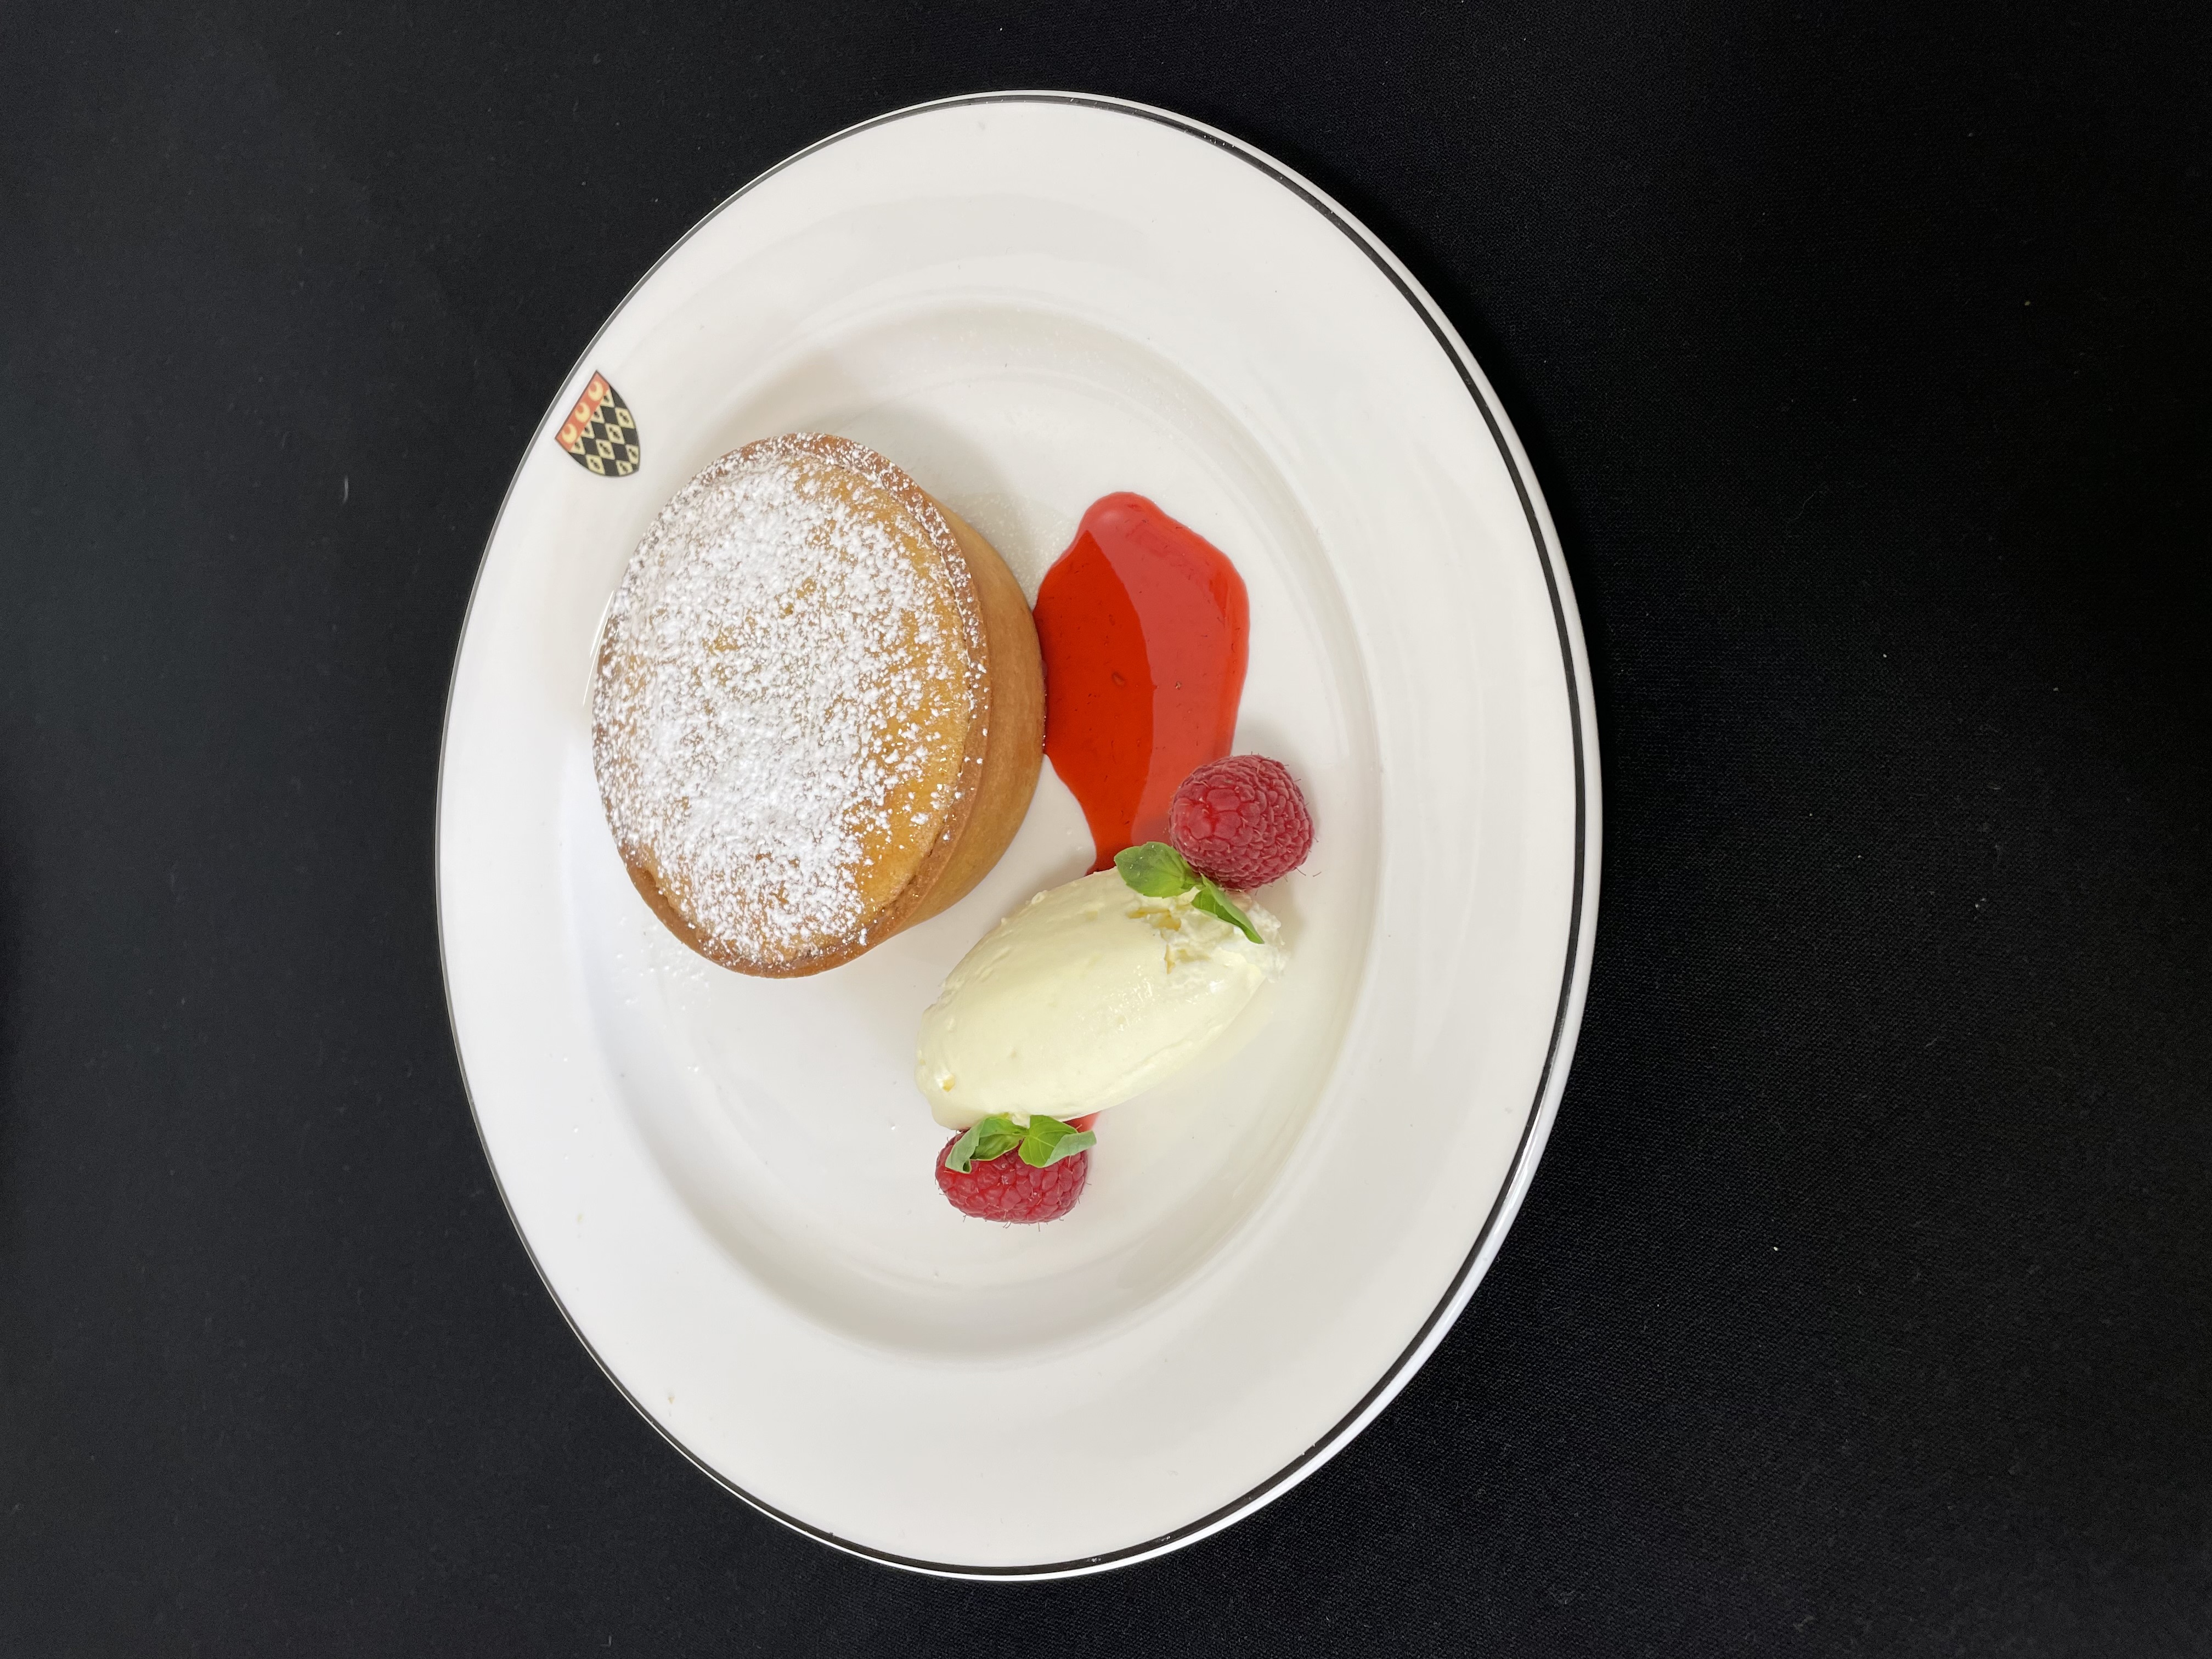 Bakewell tart: served with raspberries, Disaronno and vanilla Chantilly